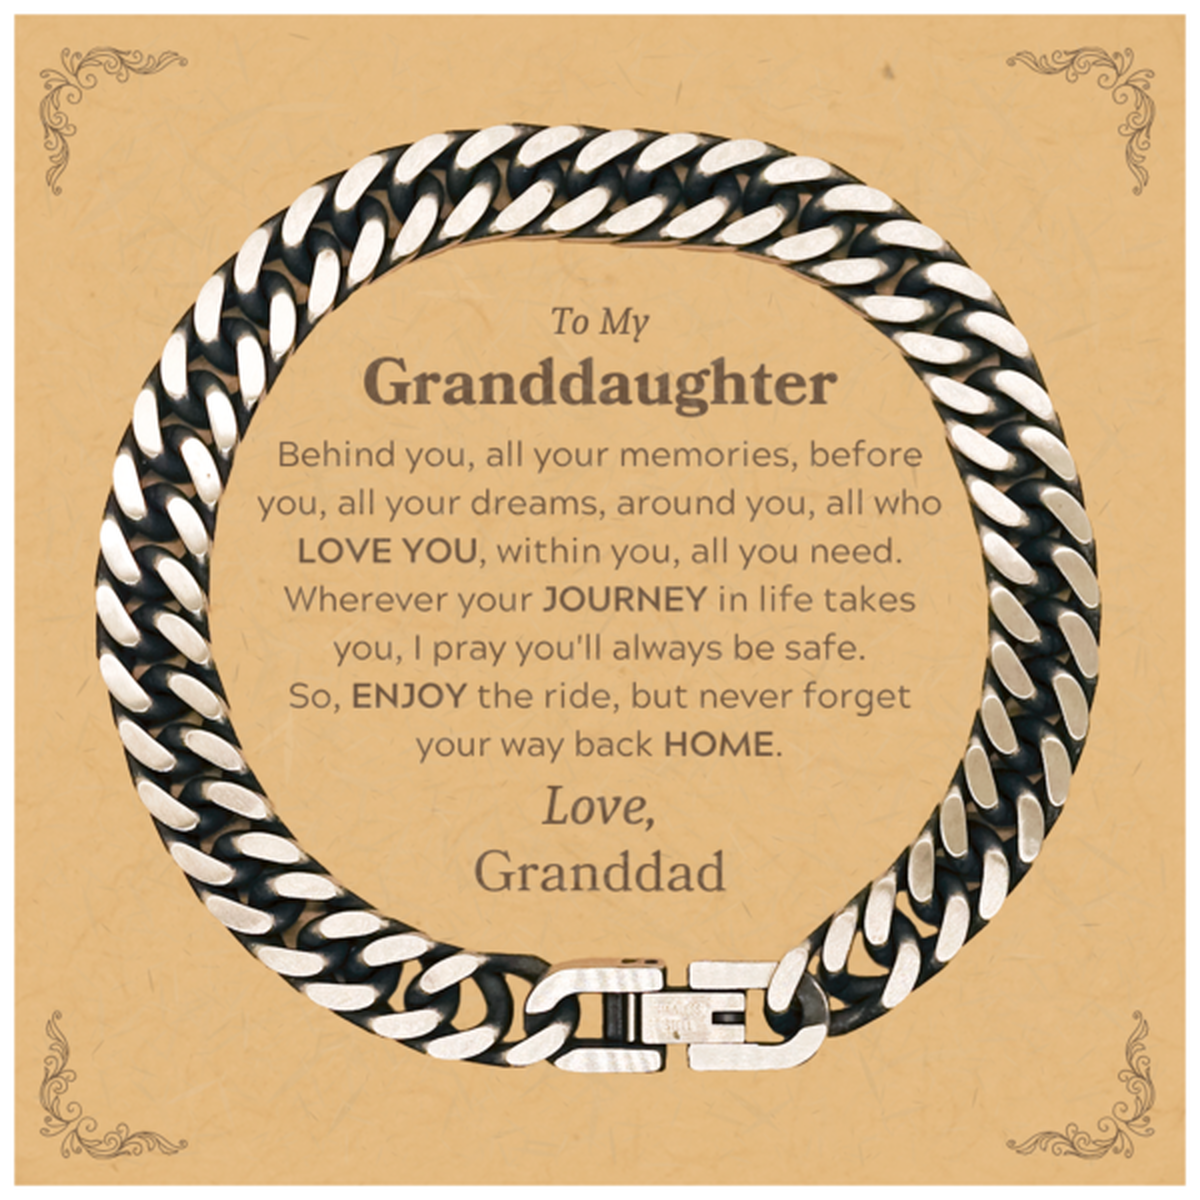 To My Granddaughter Graduation Gifts from Granddad, Granddaughter Cuban Link Chain Bracelet Christmas Birthday Gifts for Granddaughter Behind you, all your memories, before you, all your dreams. Love, Granddad